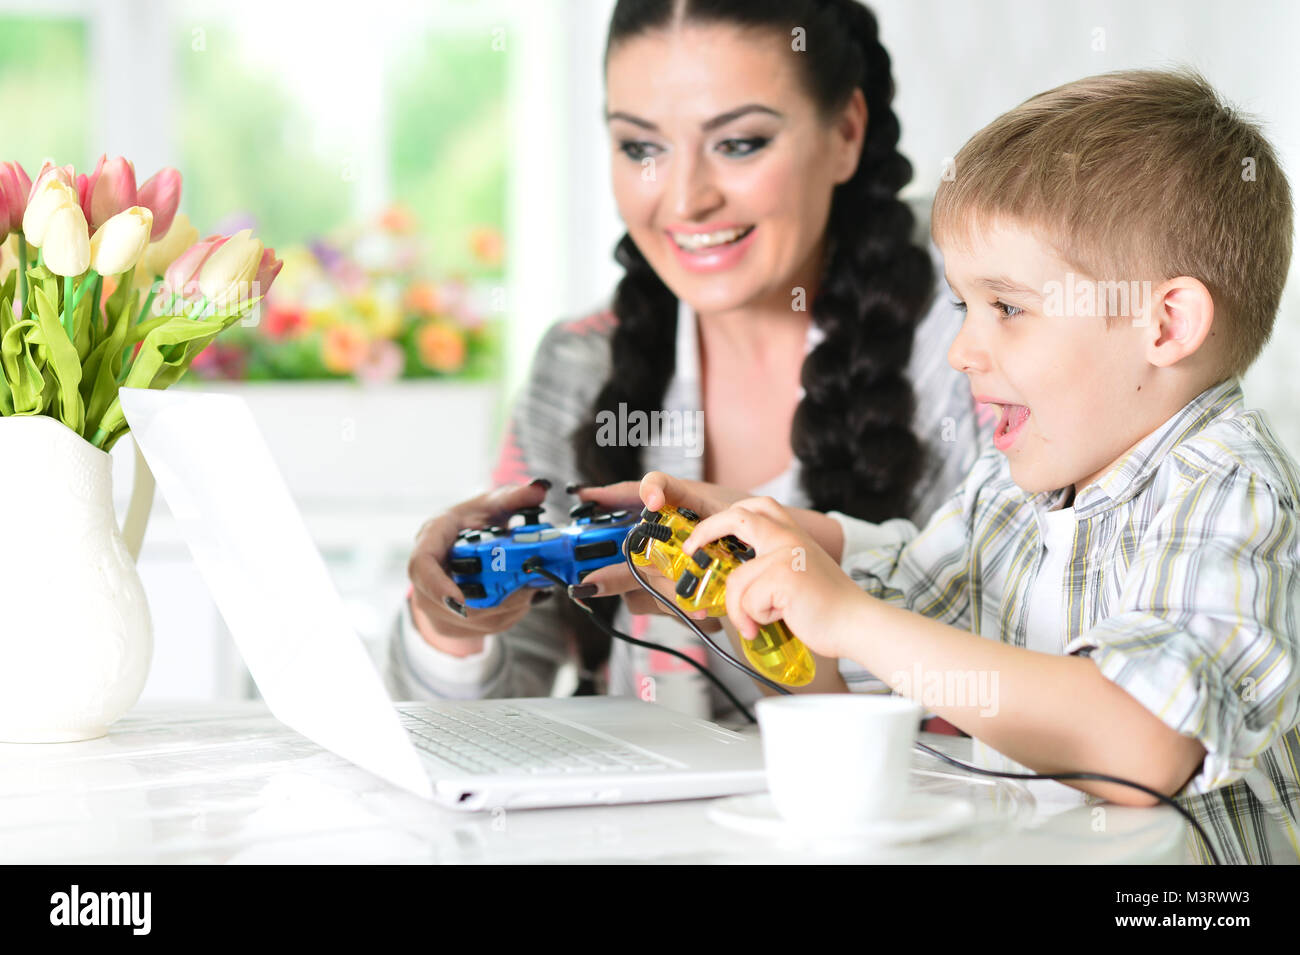 Mother and son playing computer game Stock Photo